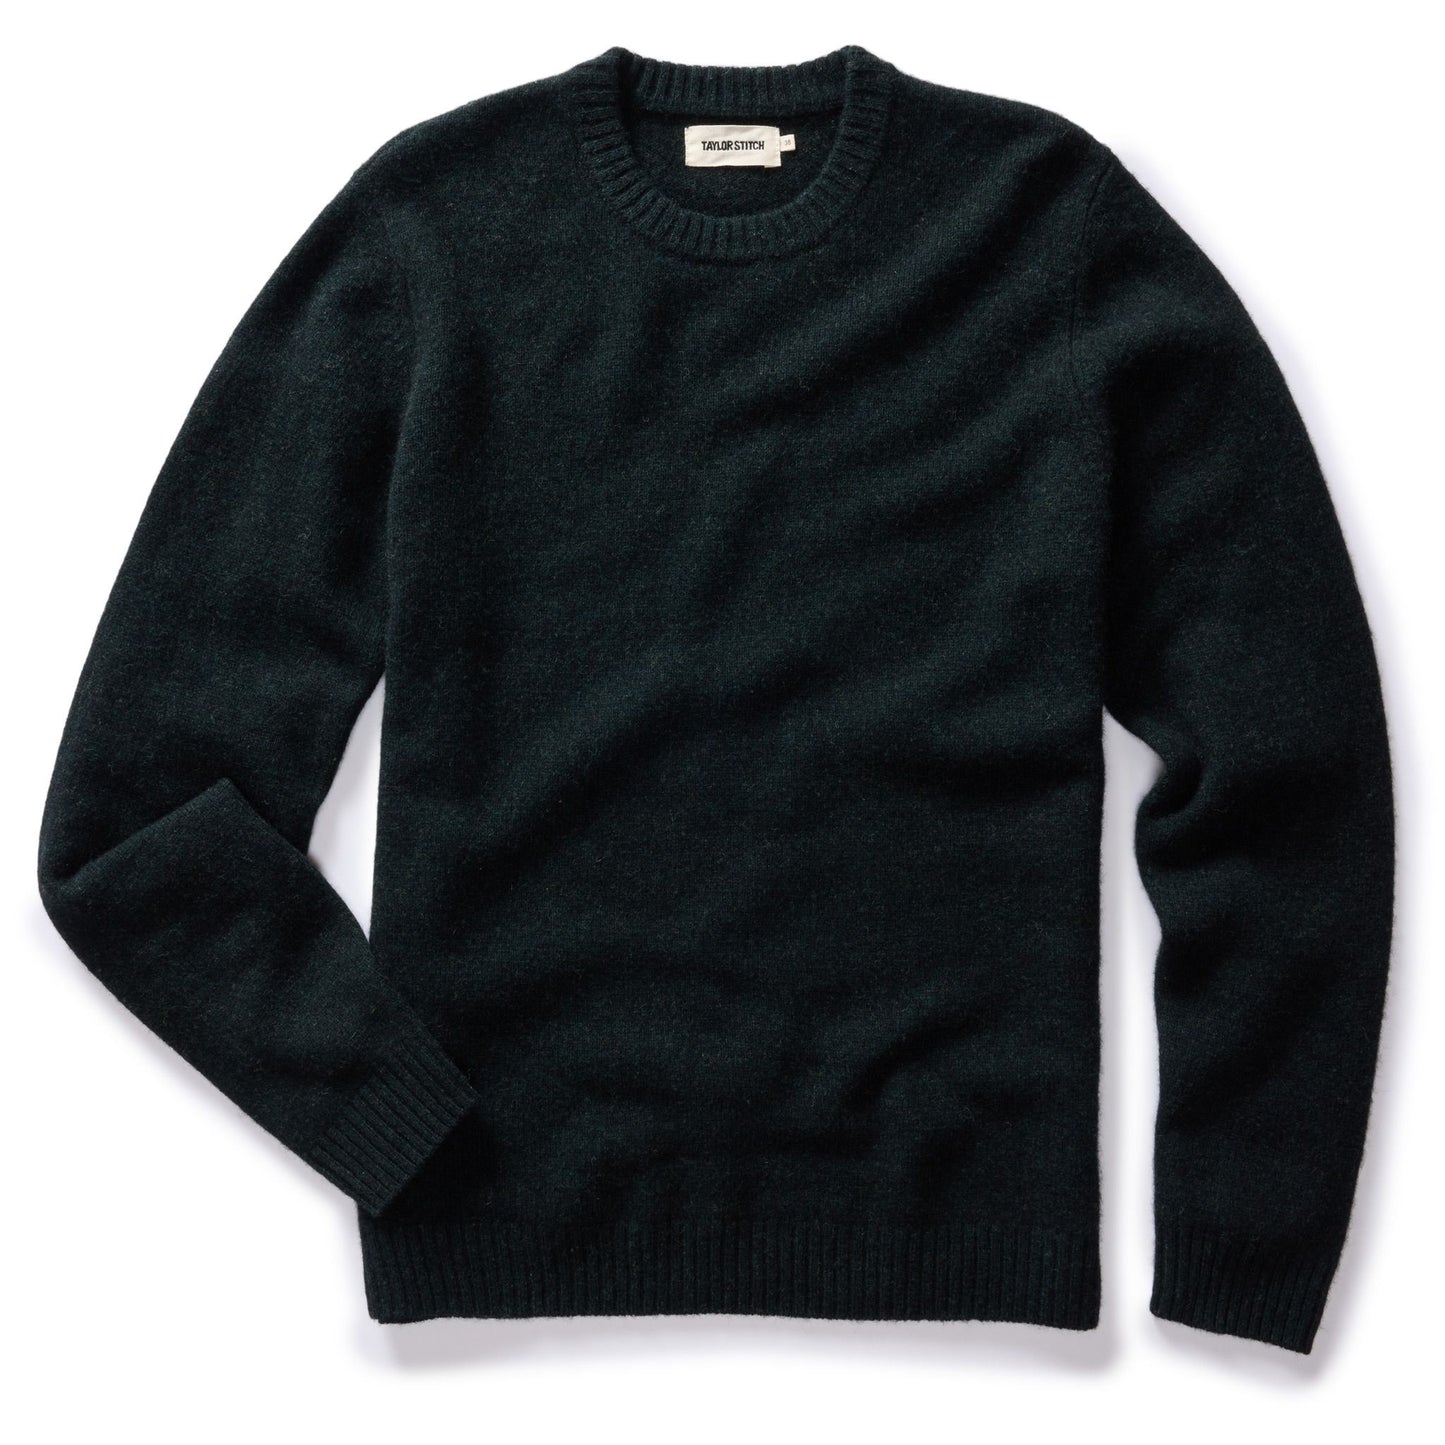 The Lodge Sweater in Black Pine